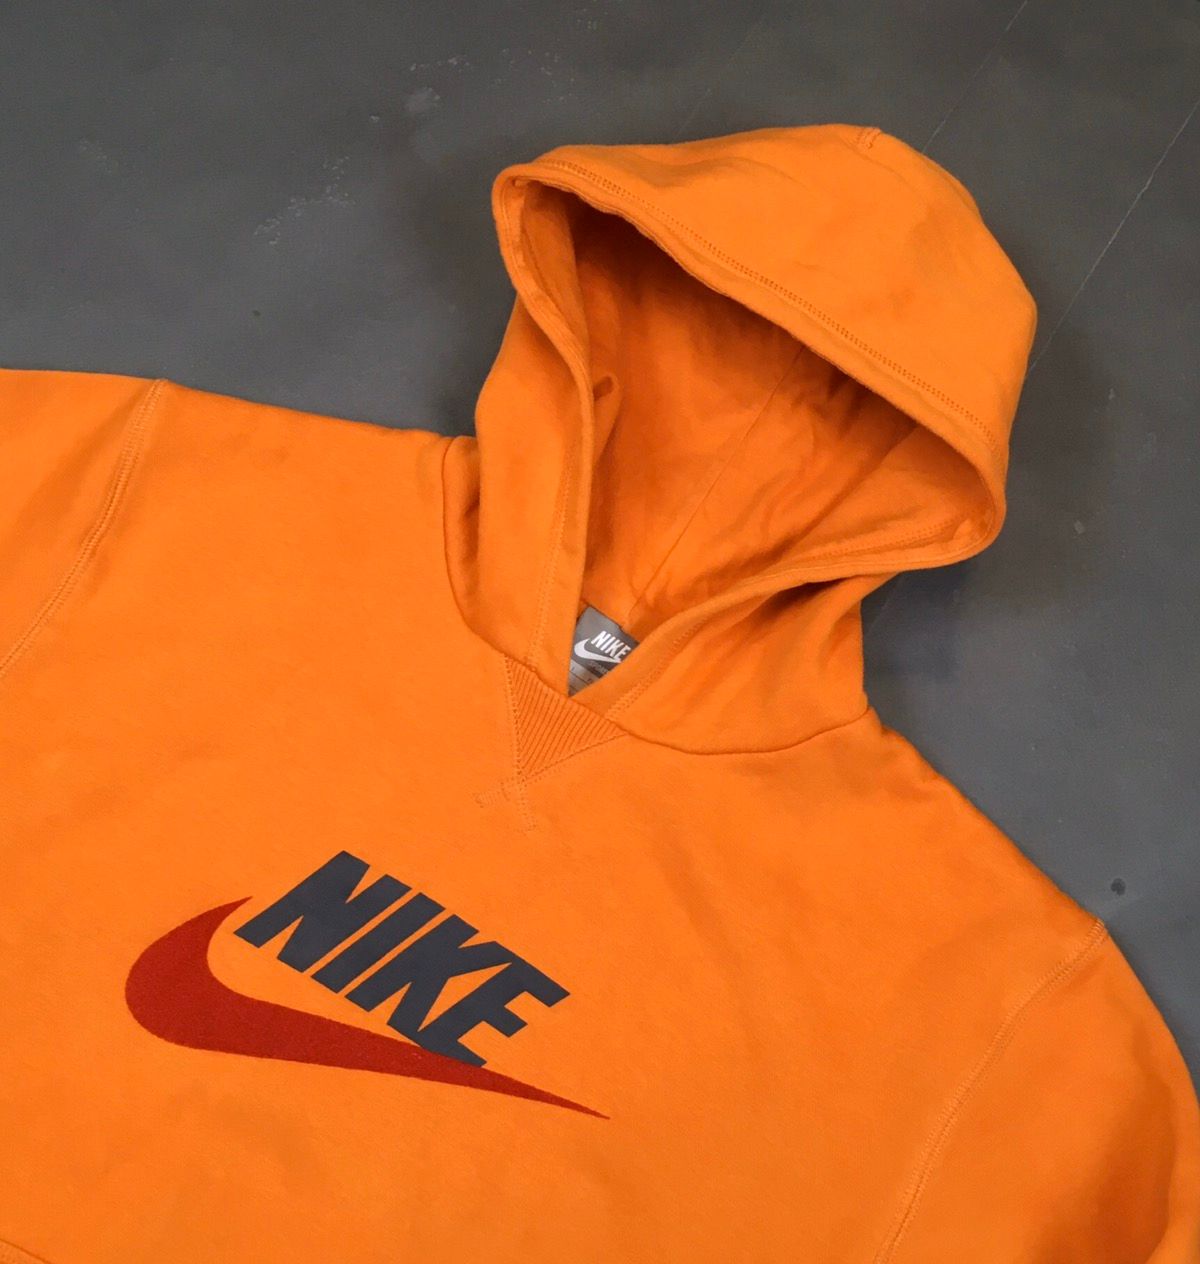 Nike Nike Vintage centr swoosh Hoodie Size US S / EU 44-46 / 1 - 1 Preview